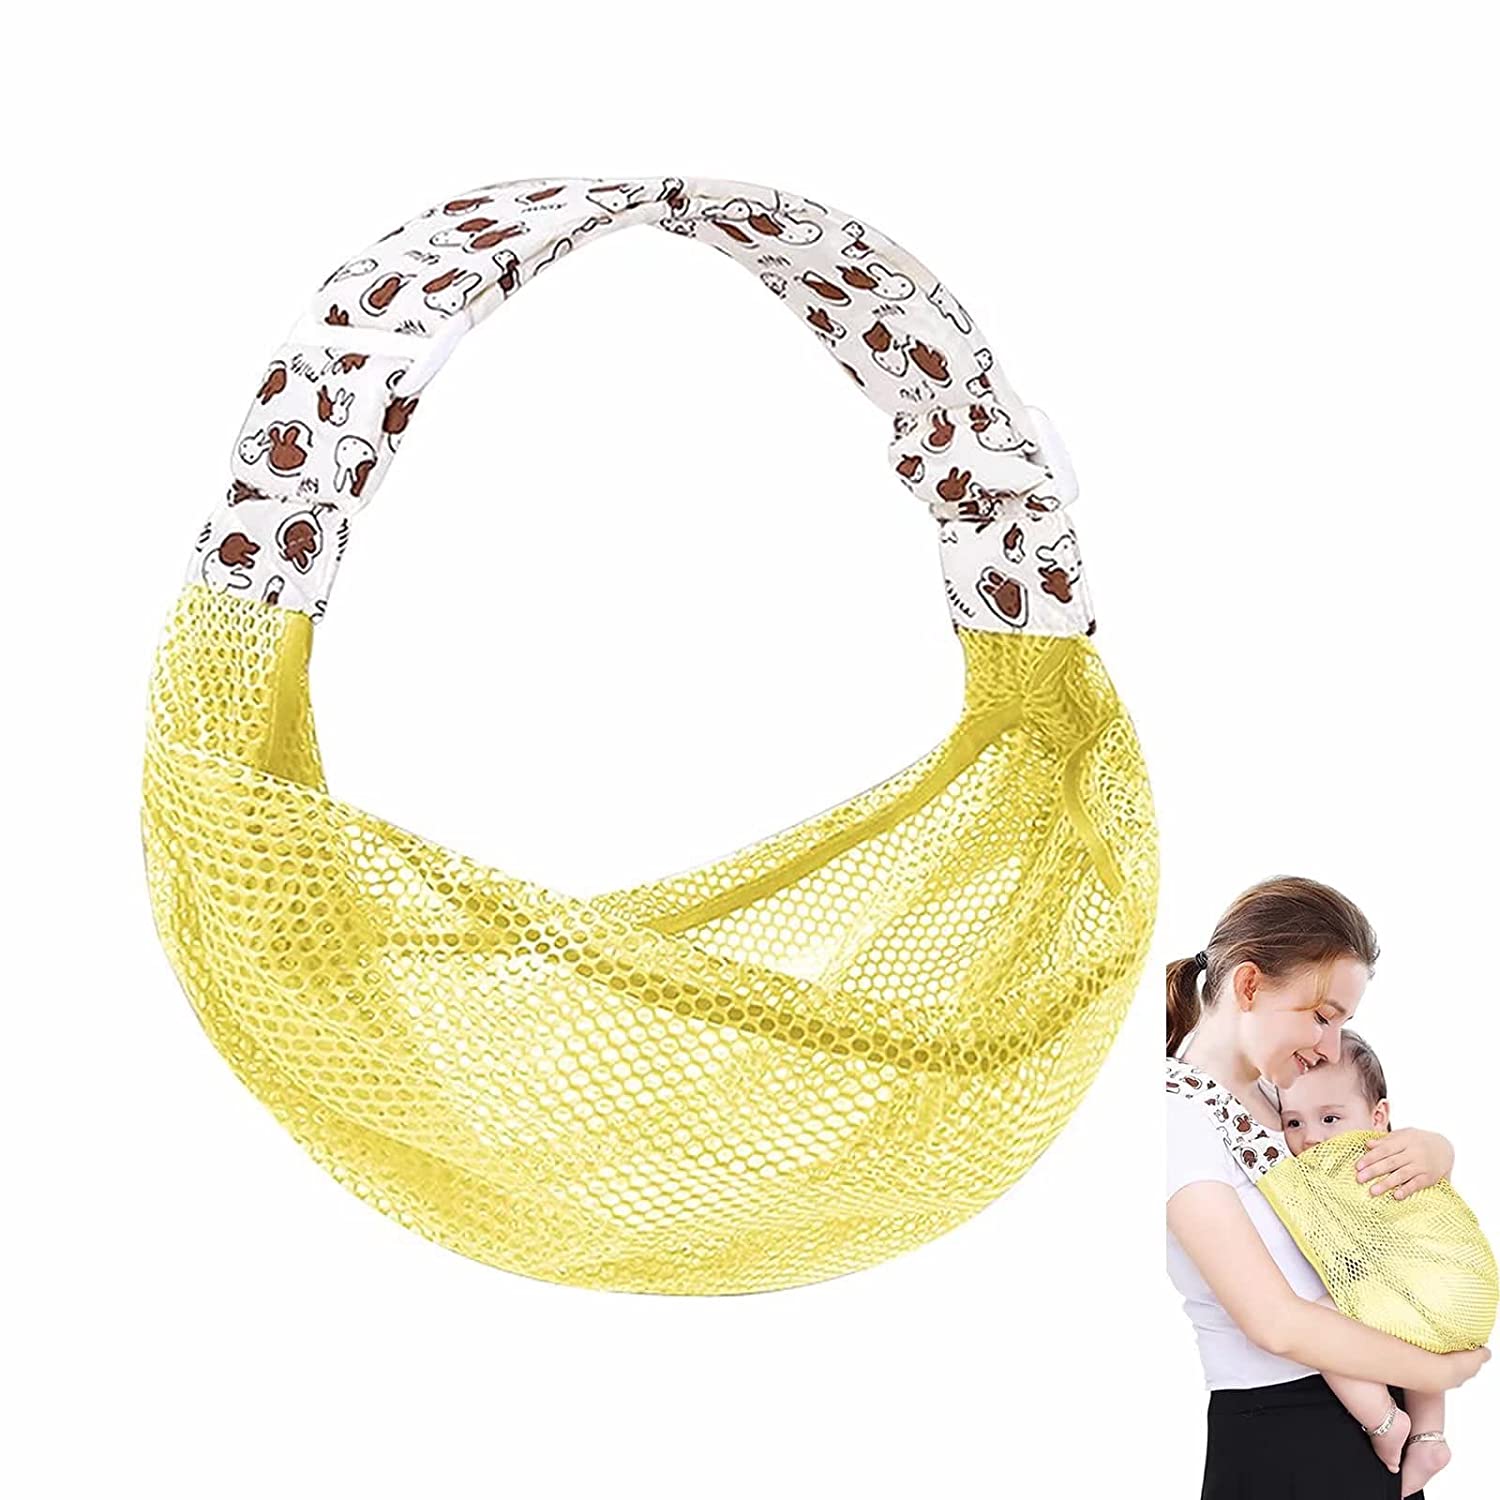 Didan Breathable Baby Sling Summer One Shoulder Adjustable Soft Mesh Front Cross Hug Baby Carrier Wrap with Thick Shoulder Straps for Newborns